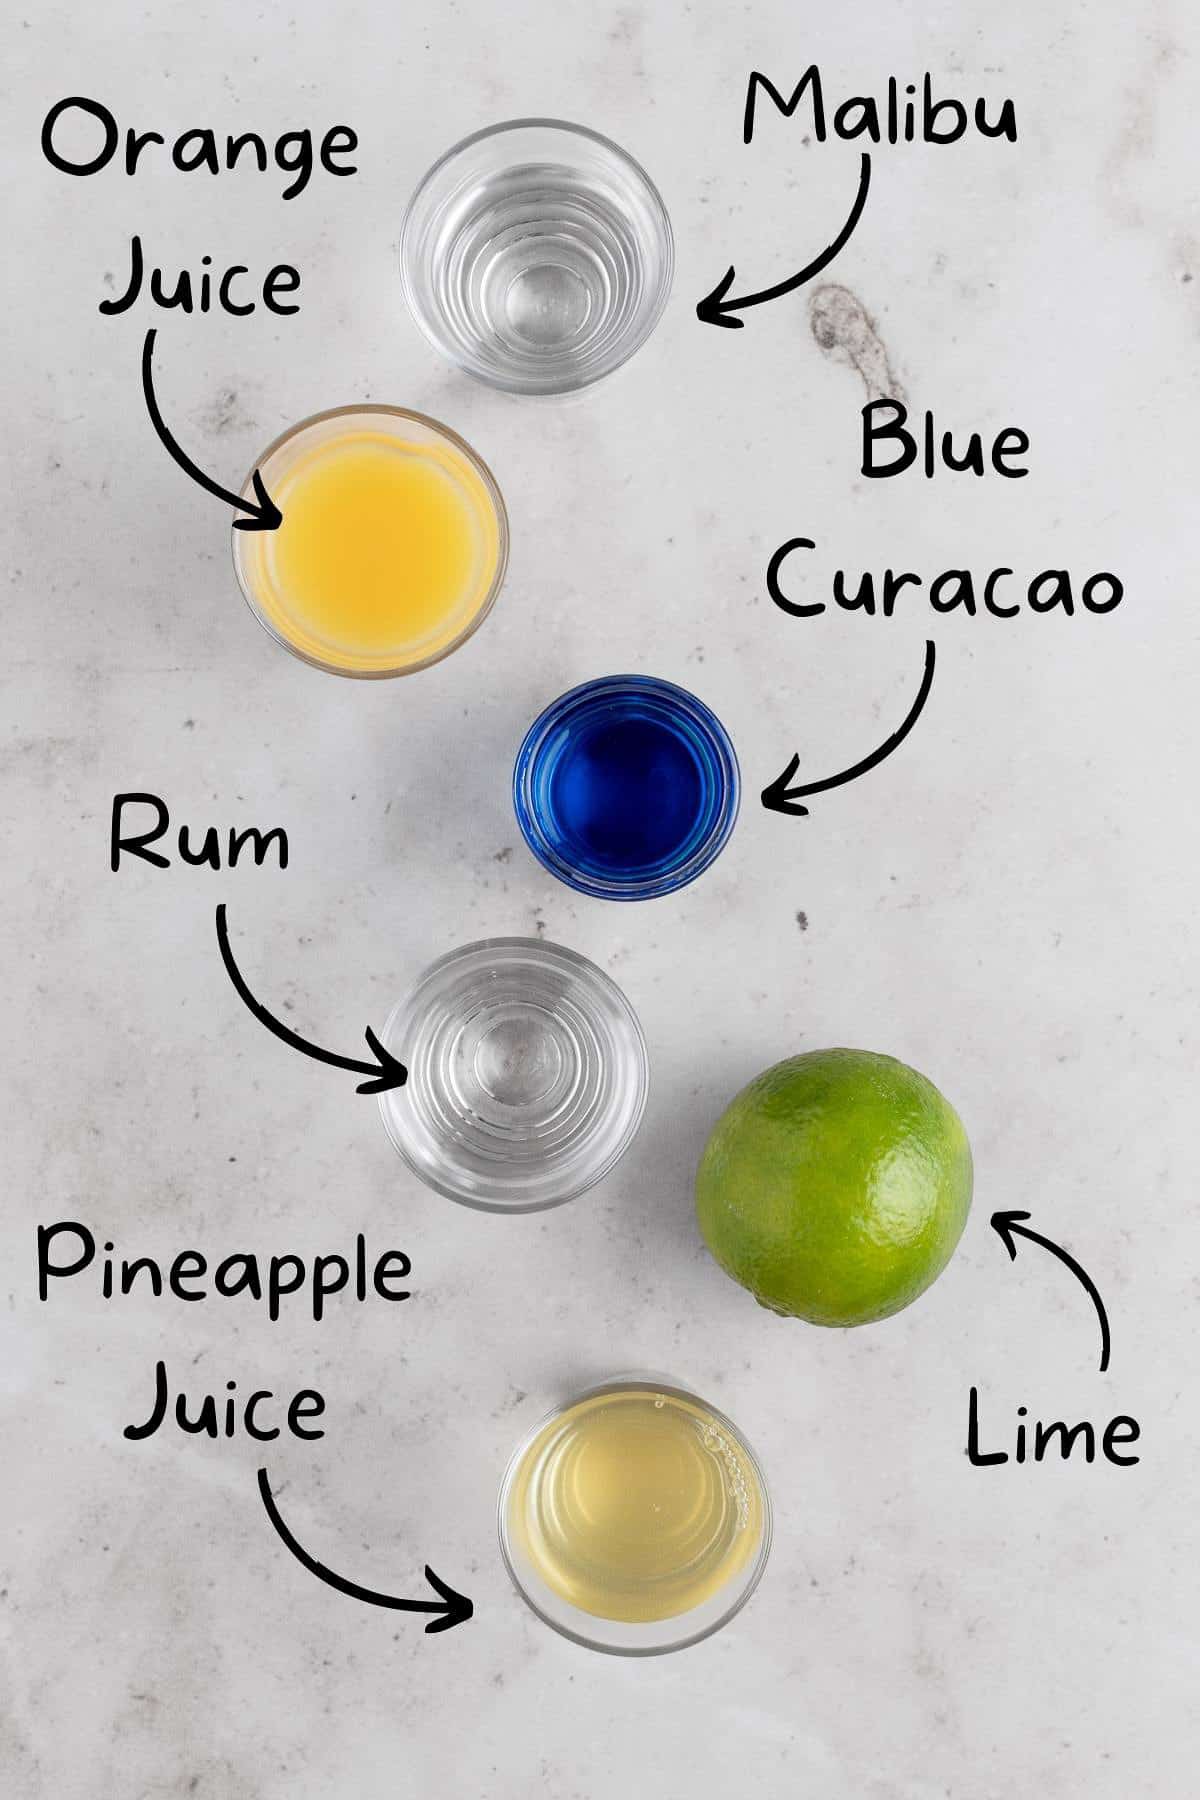 Ingredients needed to make the cocktail.